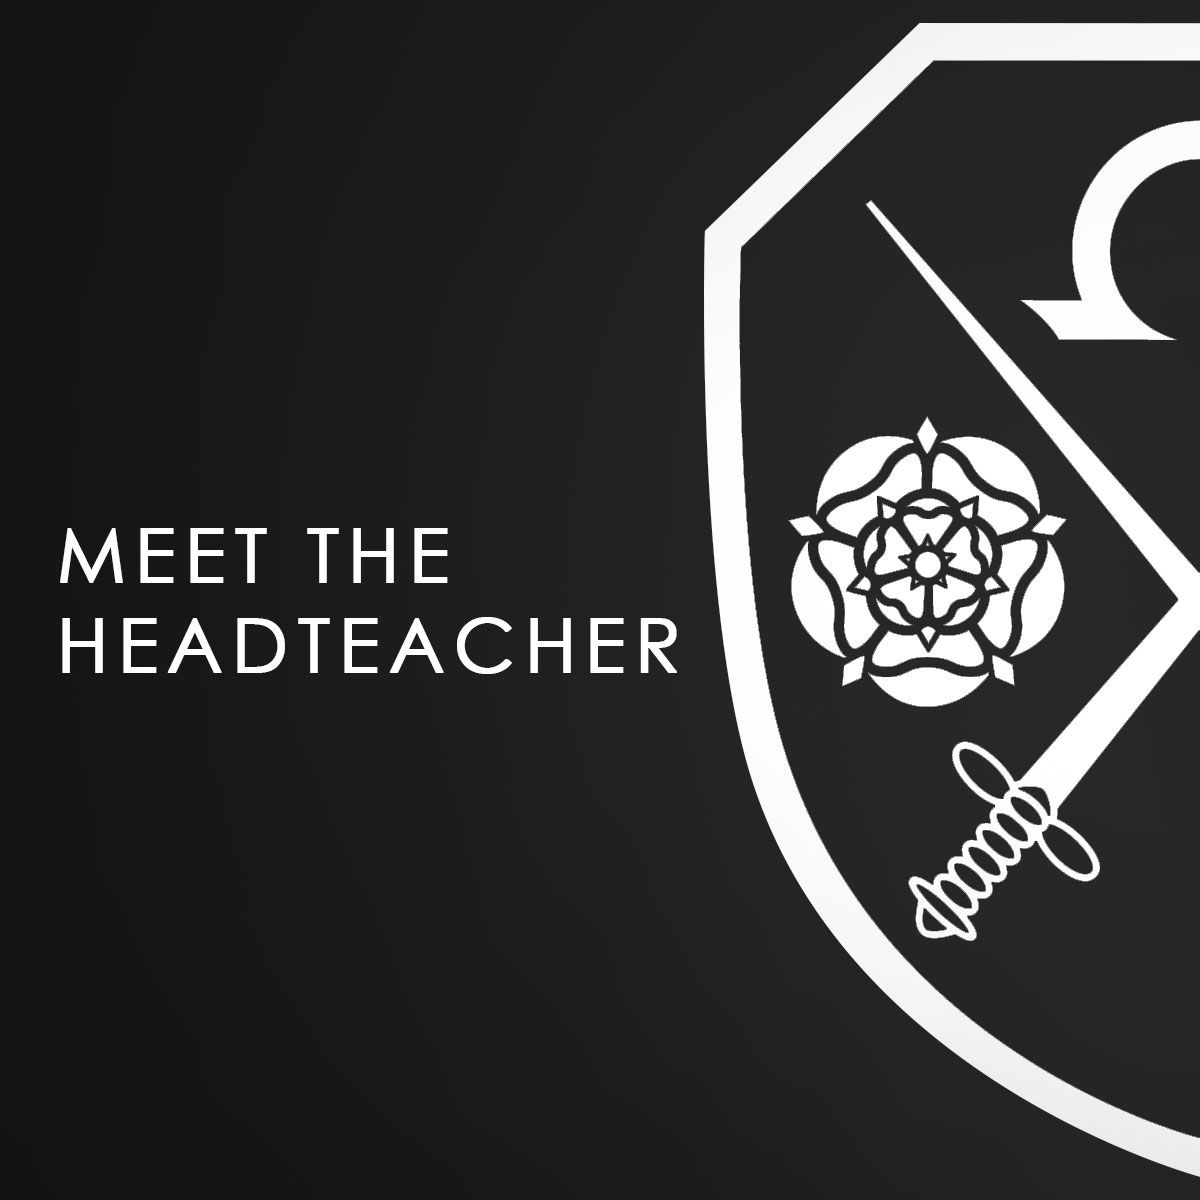 A black background with the East Barnet School logo which says about meeting the East Barnet School Headteacher